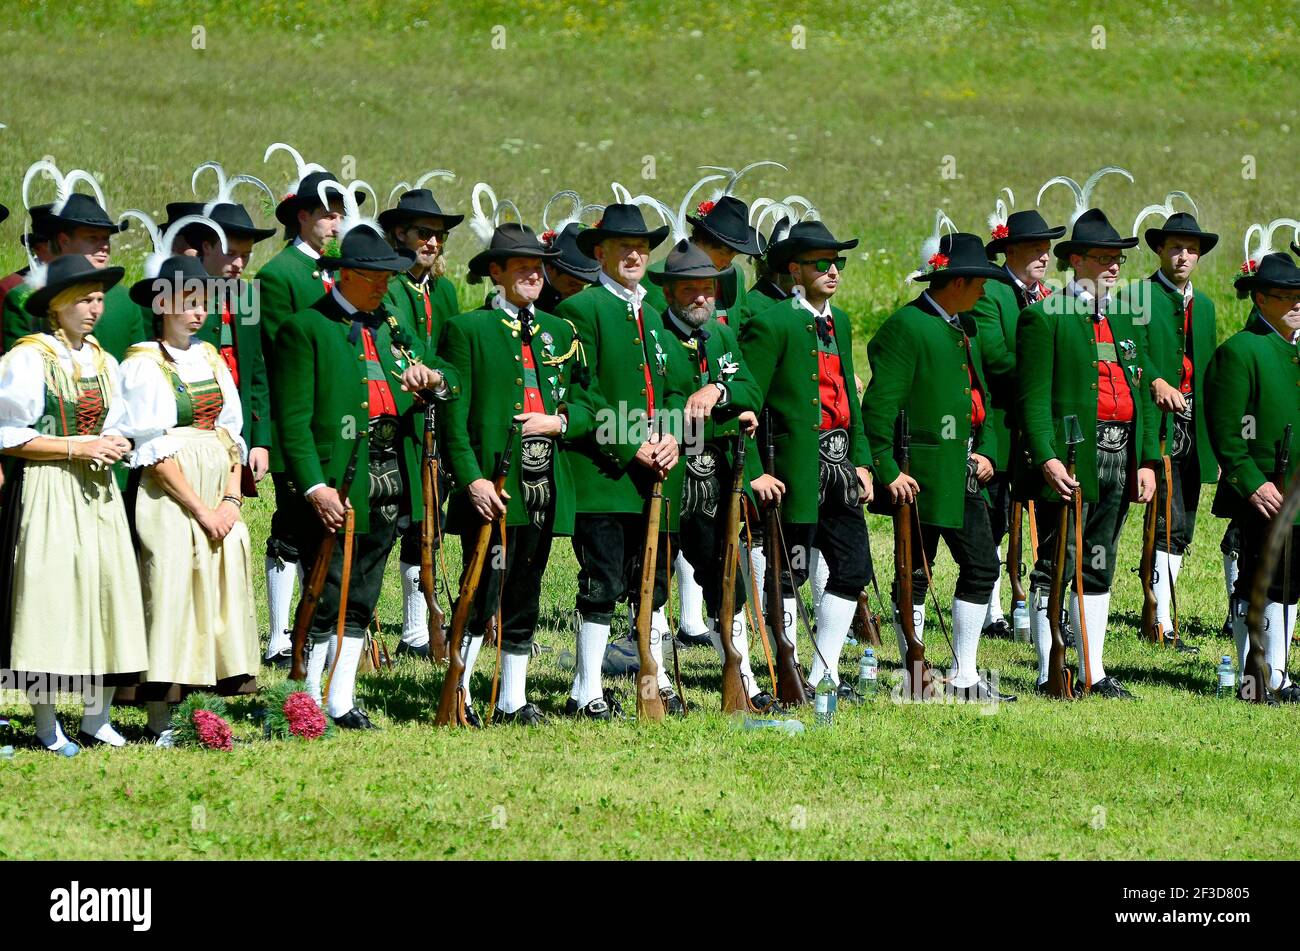 Feichten, Tyrol, Austria - June 22, 2014: Unidentified Tyrolean gun men in traditional outfit and weapons by field mass in Kaunertal valley Stock Photo